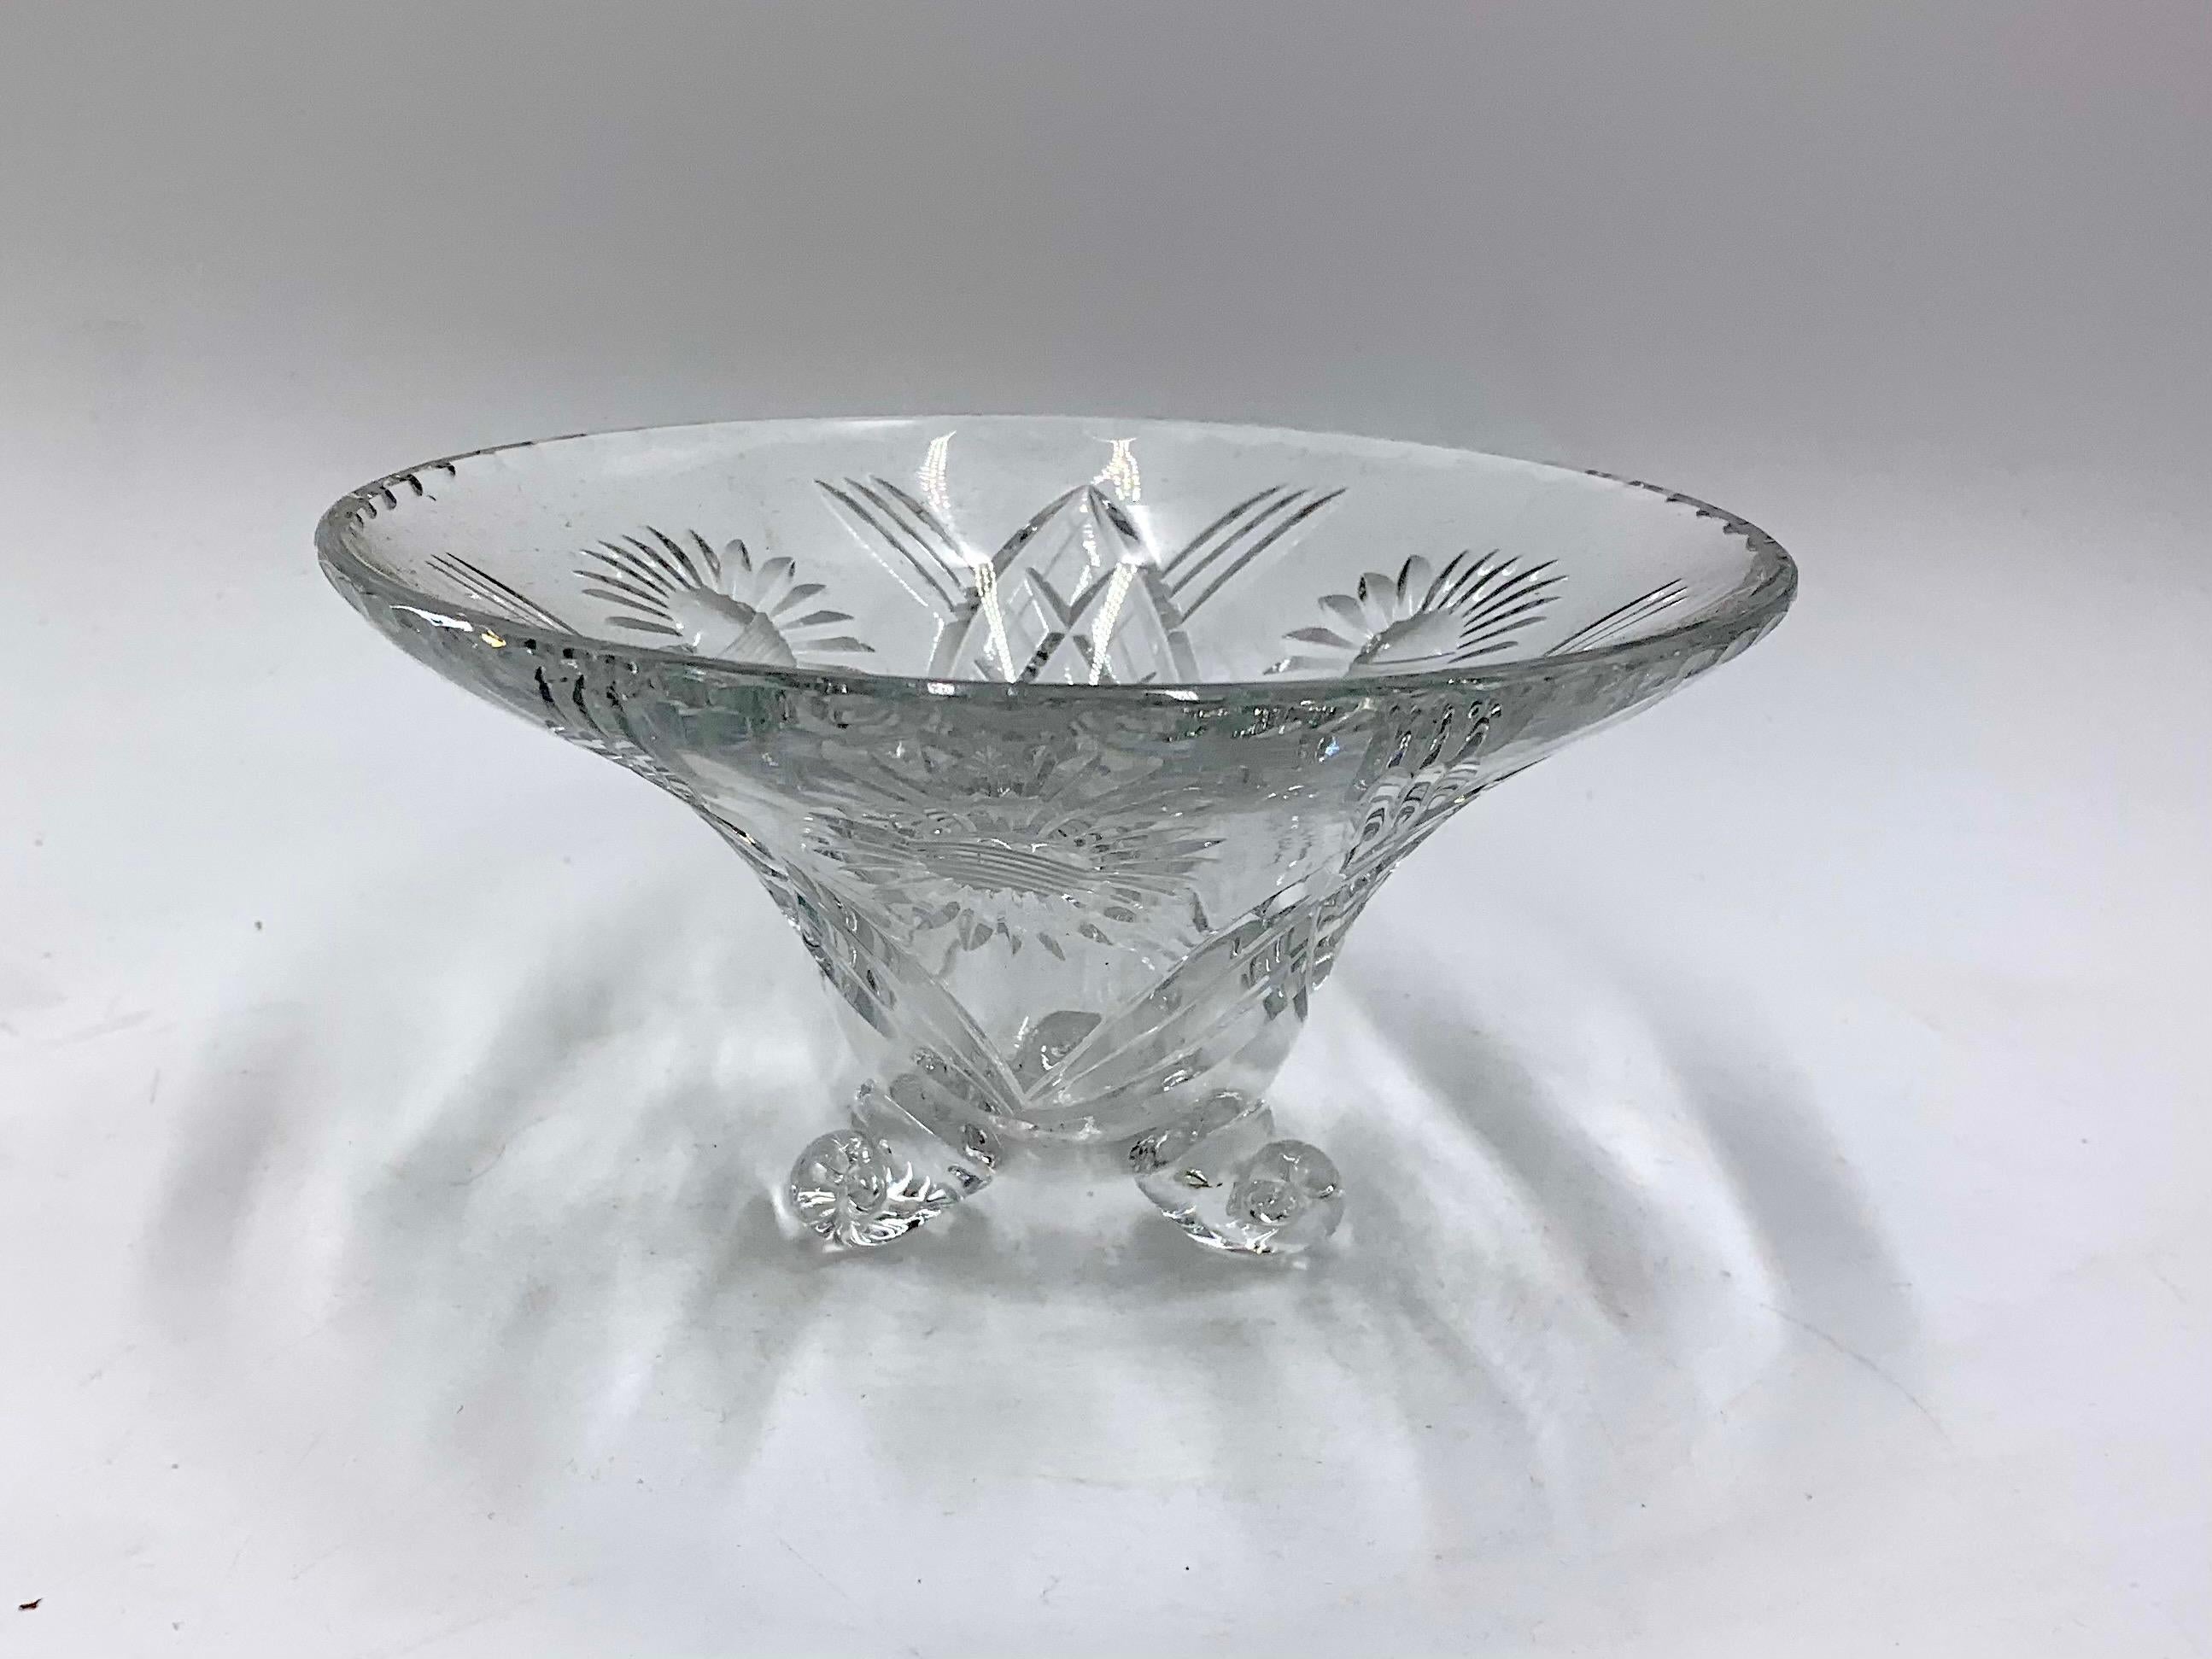 Crystal bowl - platter for fruit or sweets.
Made in Poland in the 1950s / 1960s.
Very good condition.
Dimensions: height 9cm, diameter 17.